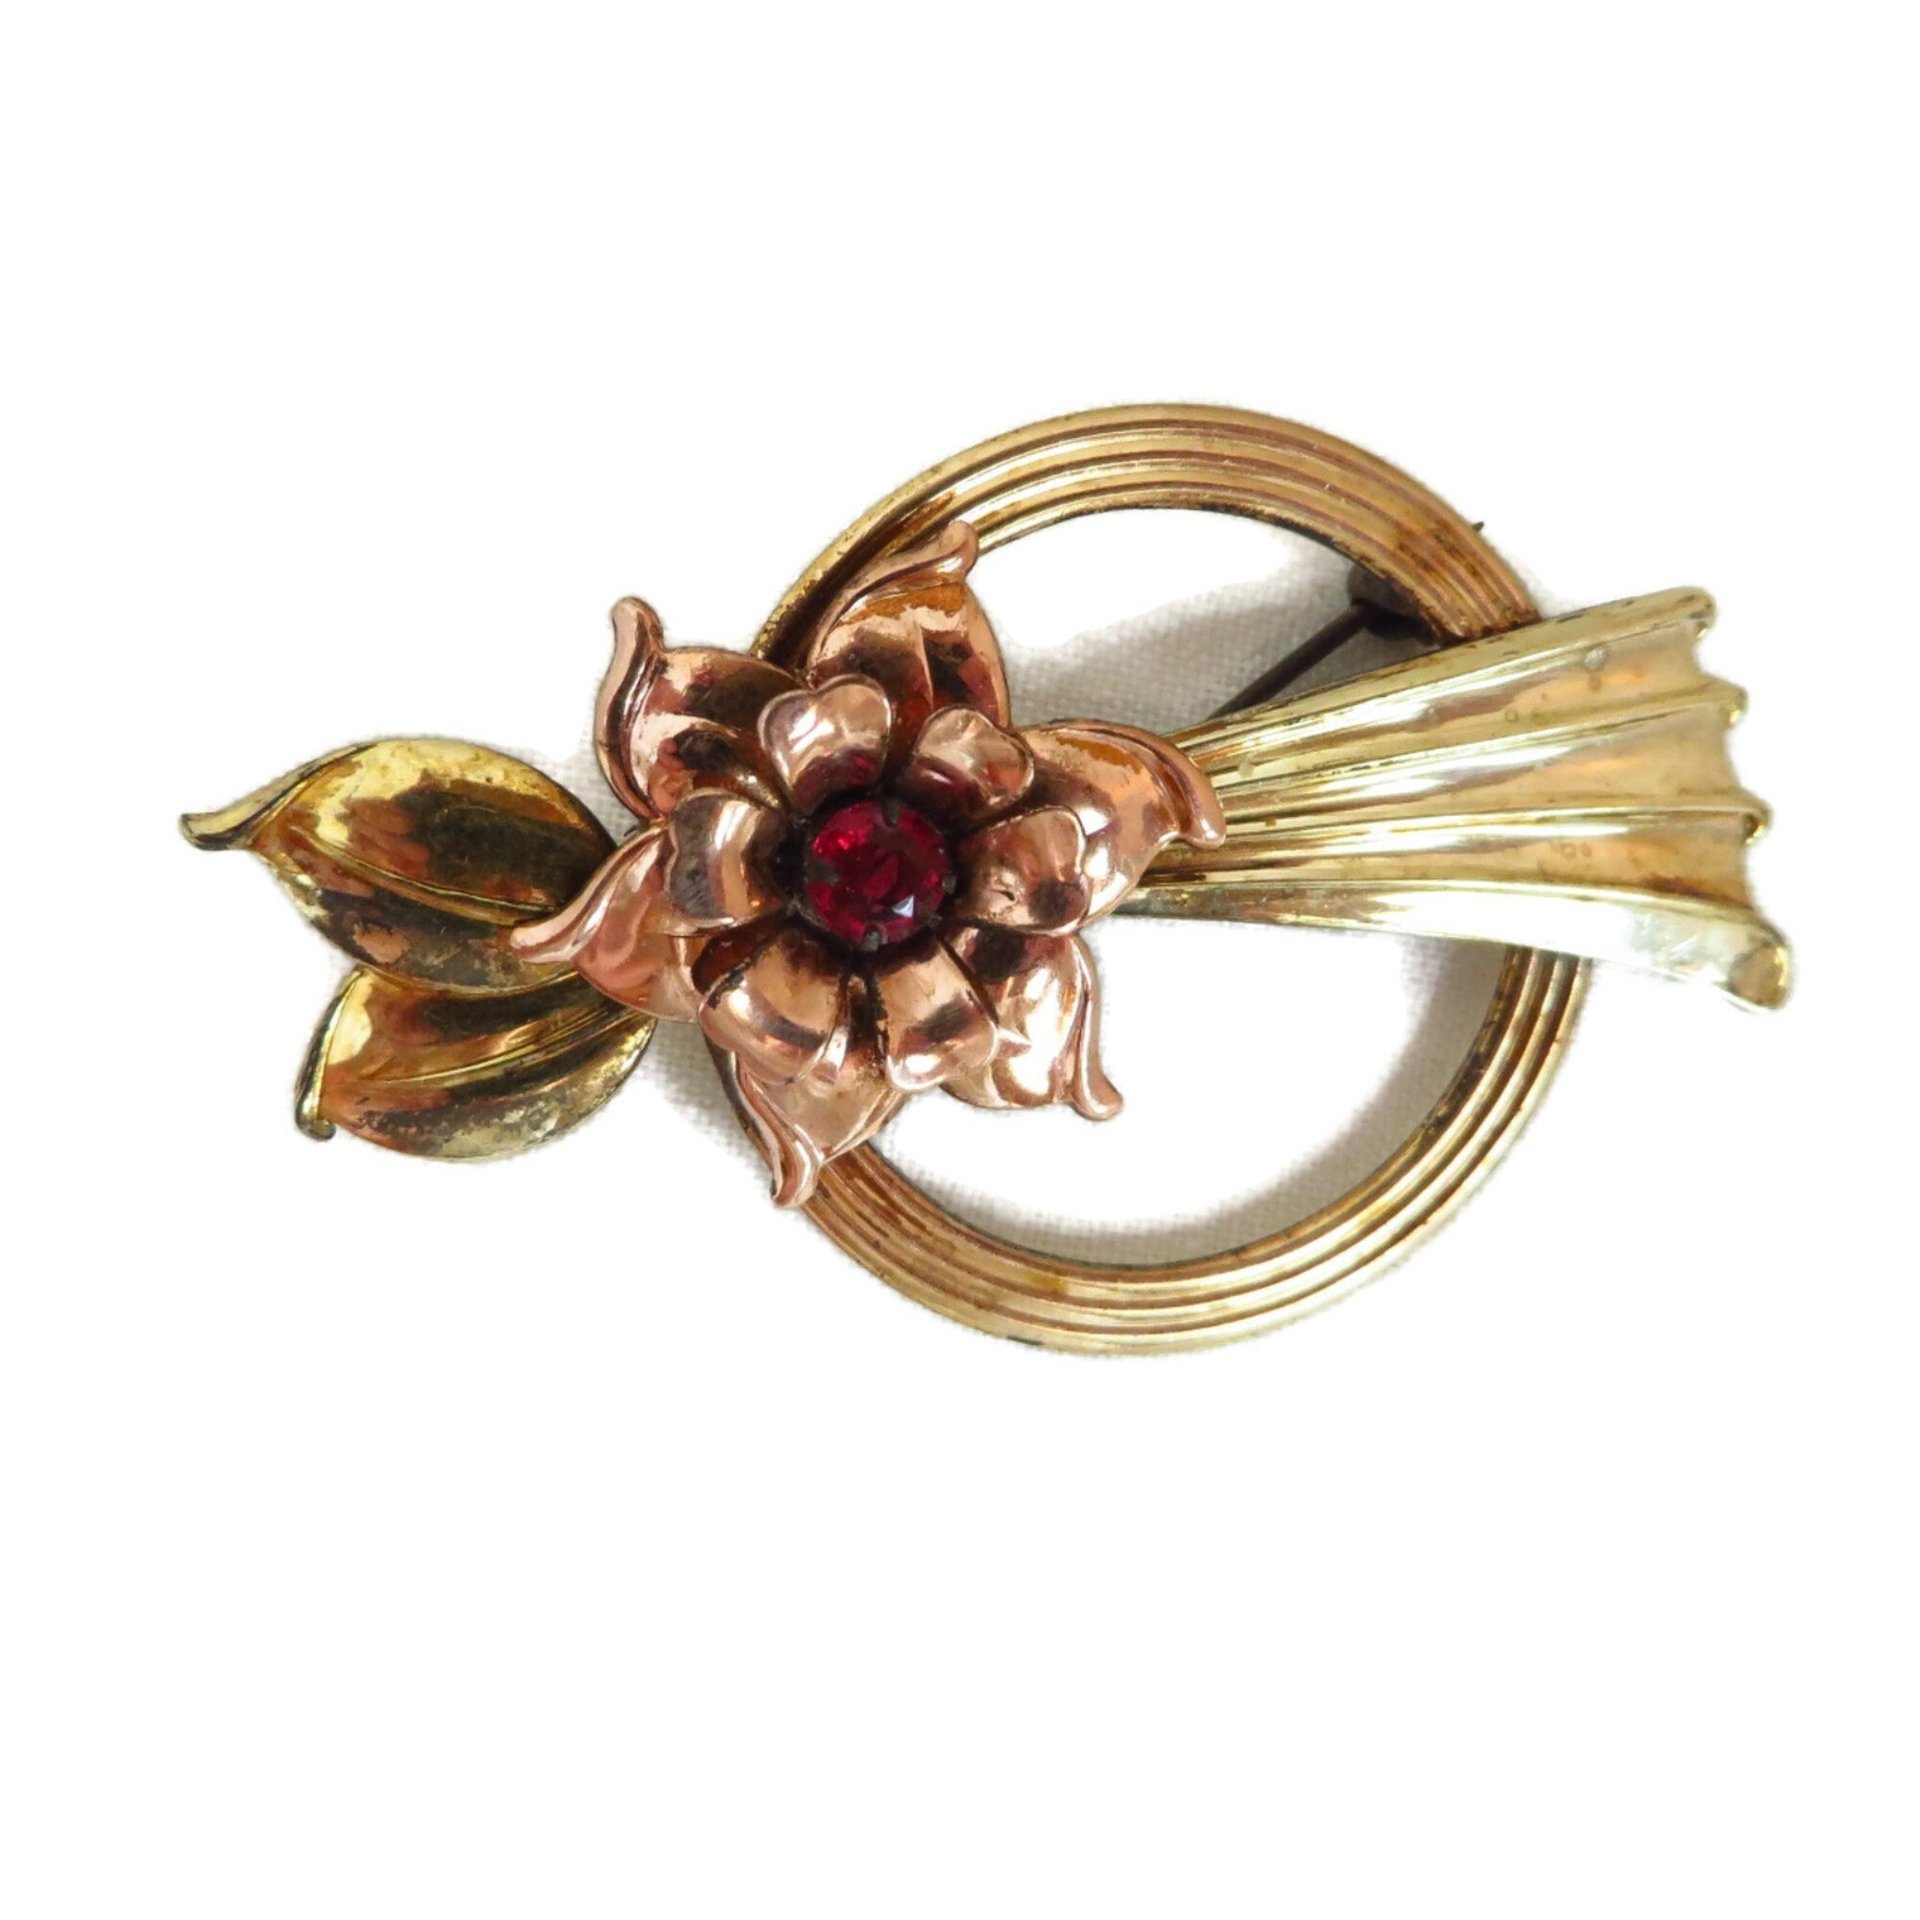 Harry Iskin Gold Filled Flower and Circle Brooch